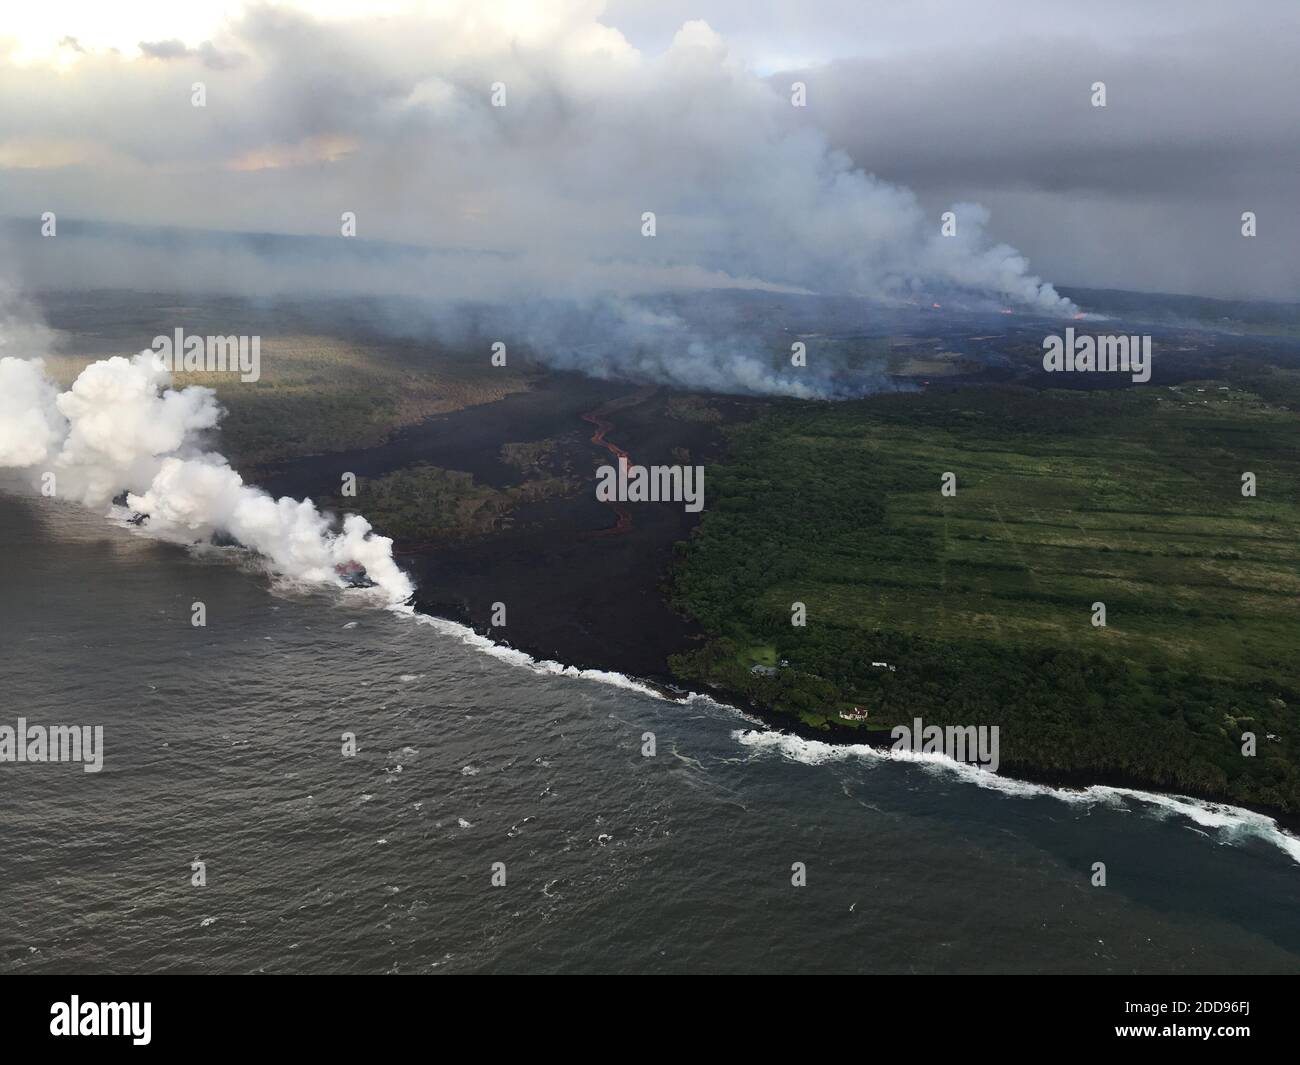 Handout photo taken on May 22, 2018 of Kilauea Volcano — Ocean Entry. The fissure complex, pictured in the upper right, continues to feed a meandering lava flow (in the center). Lava in the easternmost lobe is entering the ocean (white plume). Photo by usgs via ABACAPRESS.COM Stock Photo